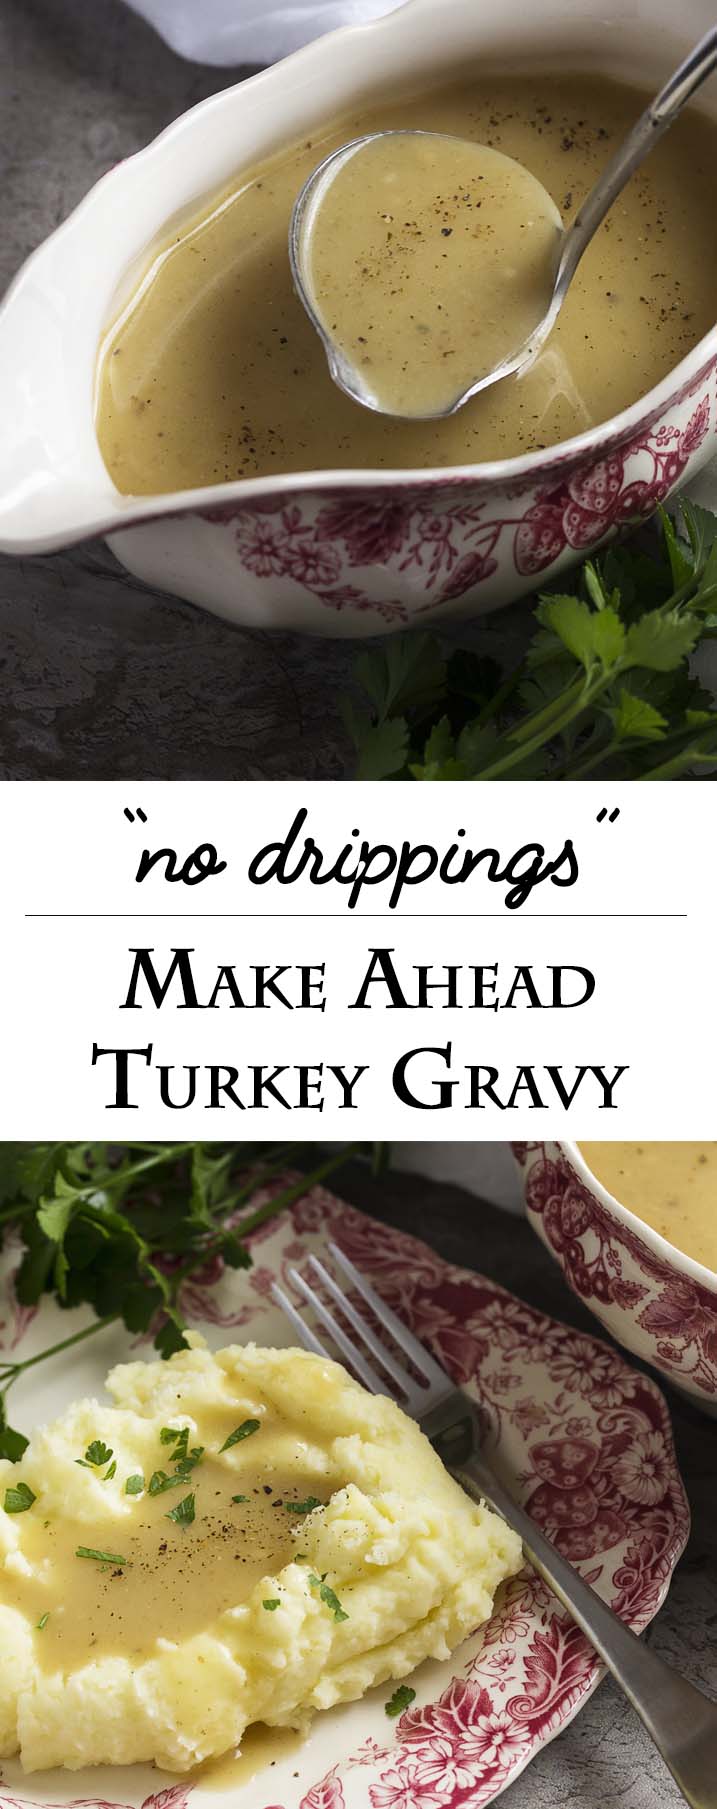 No drippings? No problem! Make this flavorful, rich gravy by layering flavors in your stockpot. Great for make ahead turkey gravy or gravy for grilled/fried turkeys. | justalittlebitofbacon.com